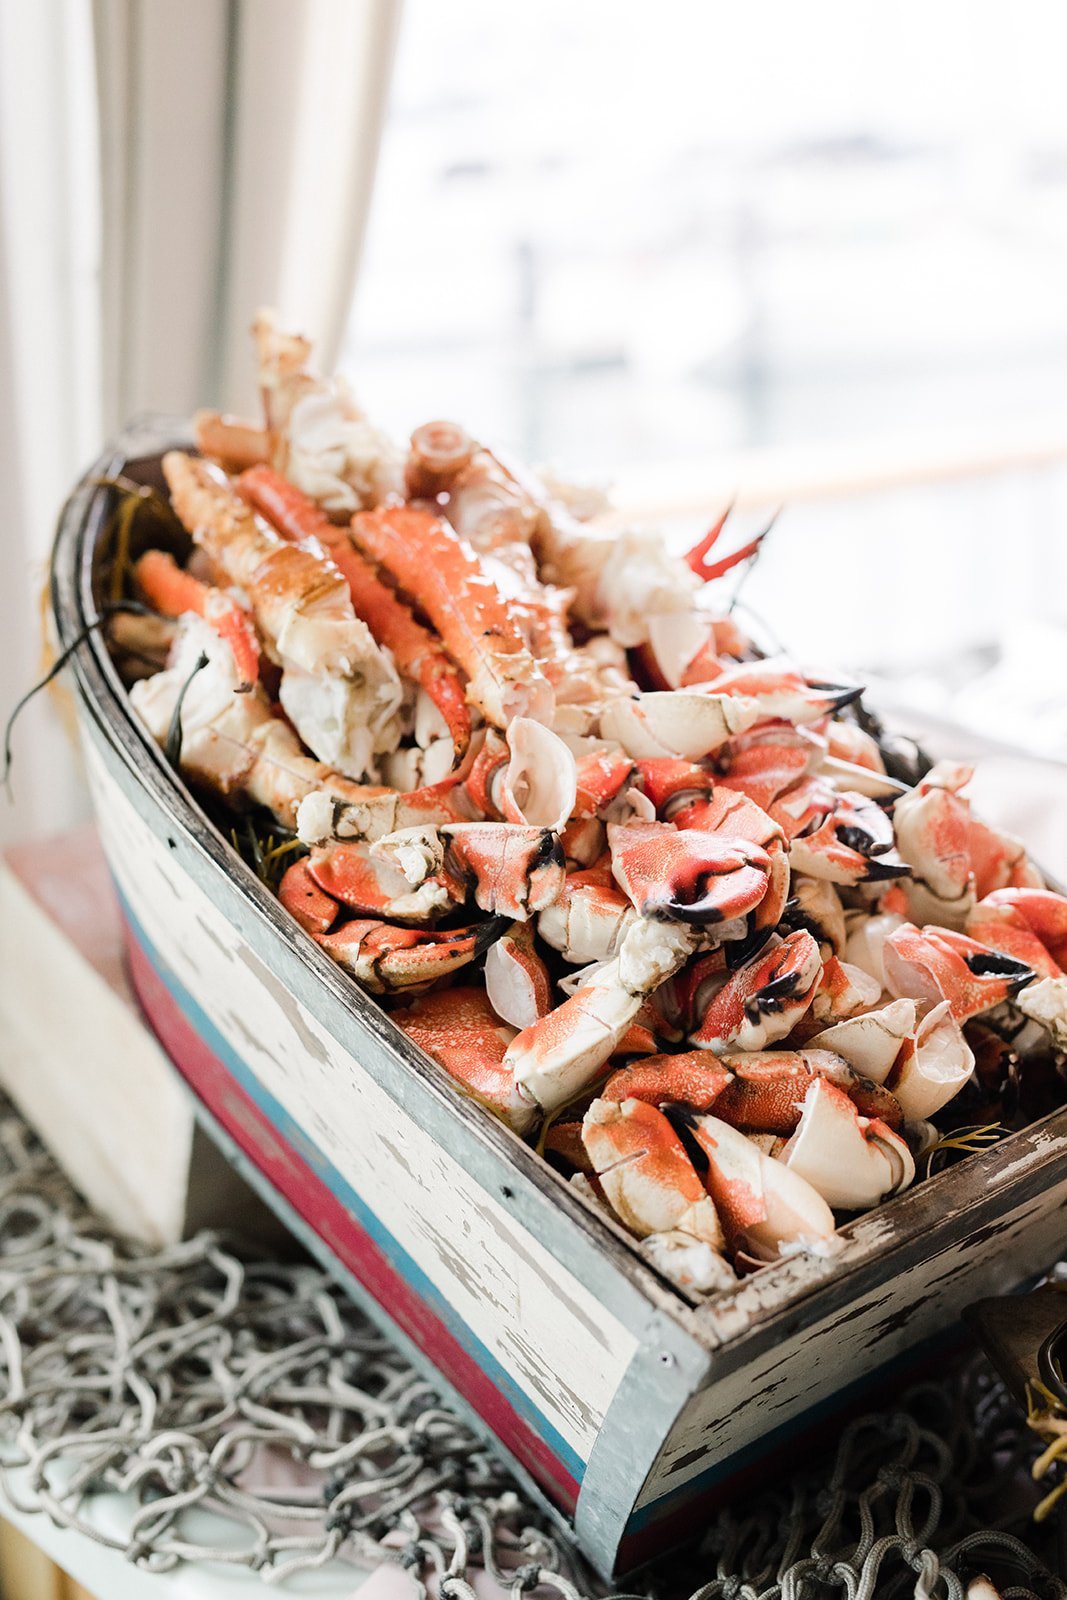 www.santabarbarawedding.com | Anna Delores Photography | Channel Cat Charters | Onyx + Redwood | Catering Connection | Crab Claws in a Bowl Shaped Like a Boat